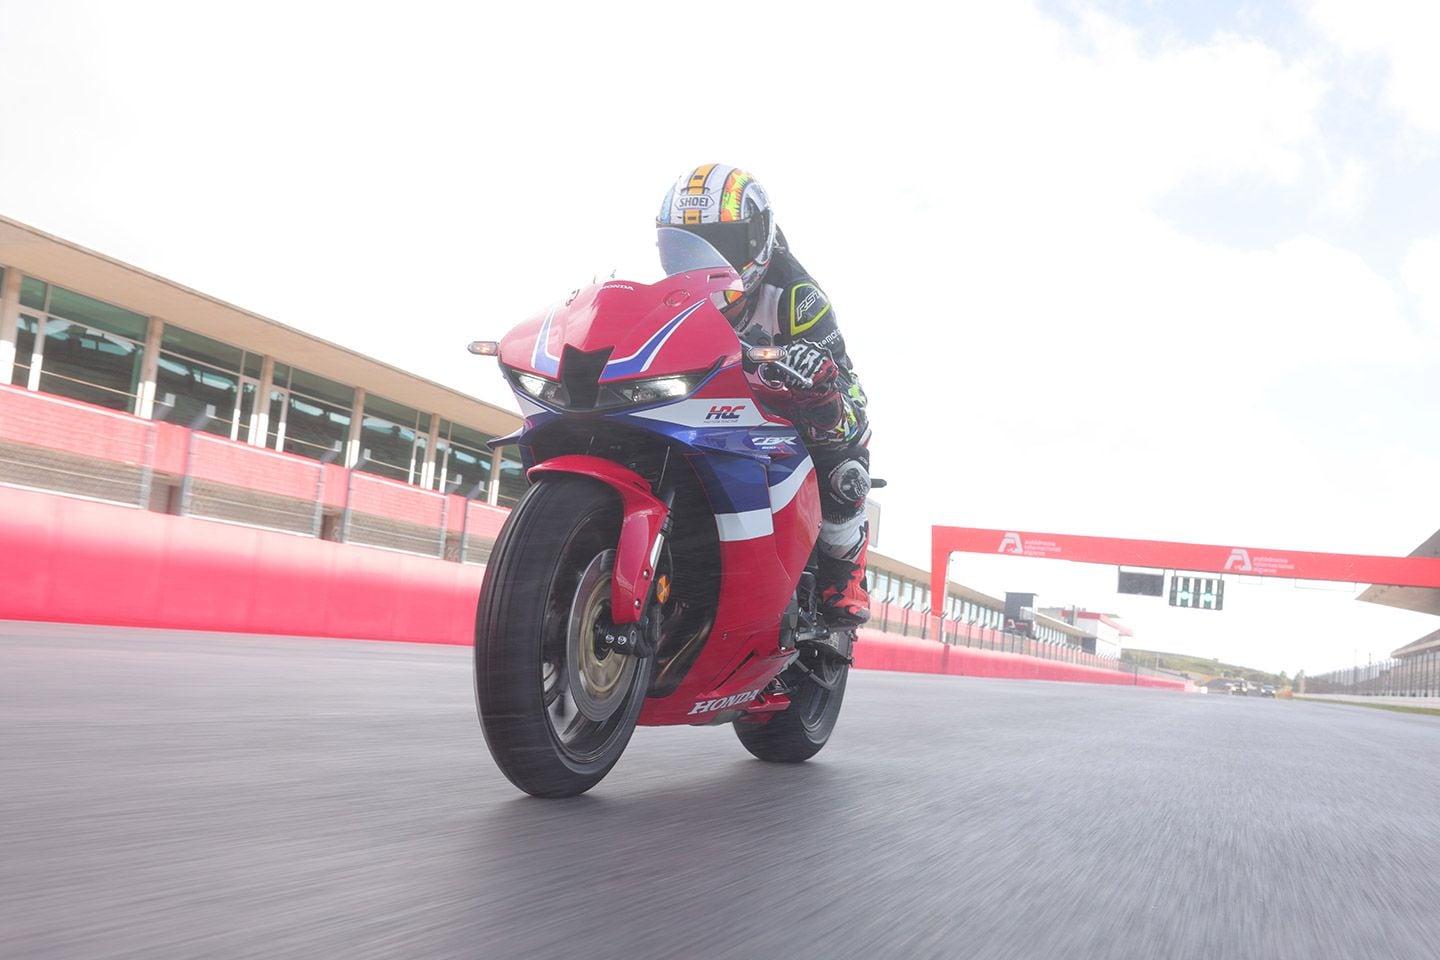 Mixed conditions highlighted the new rider aids, controlled by a new Bosch six-axis IMU—same as the new 2024 Fireblade, recently launched in Europe.